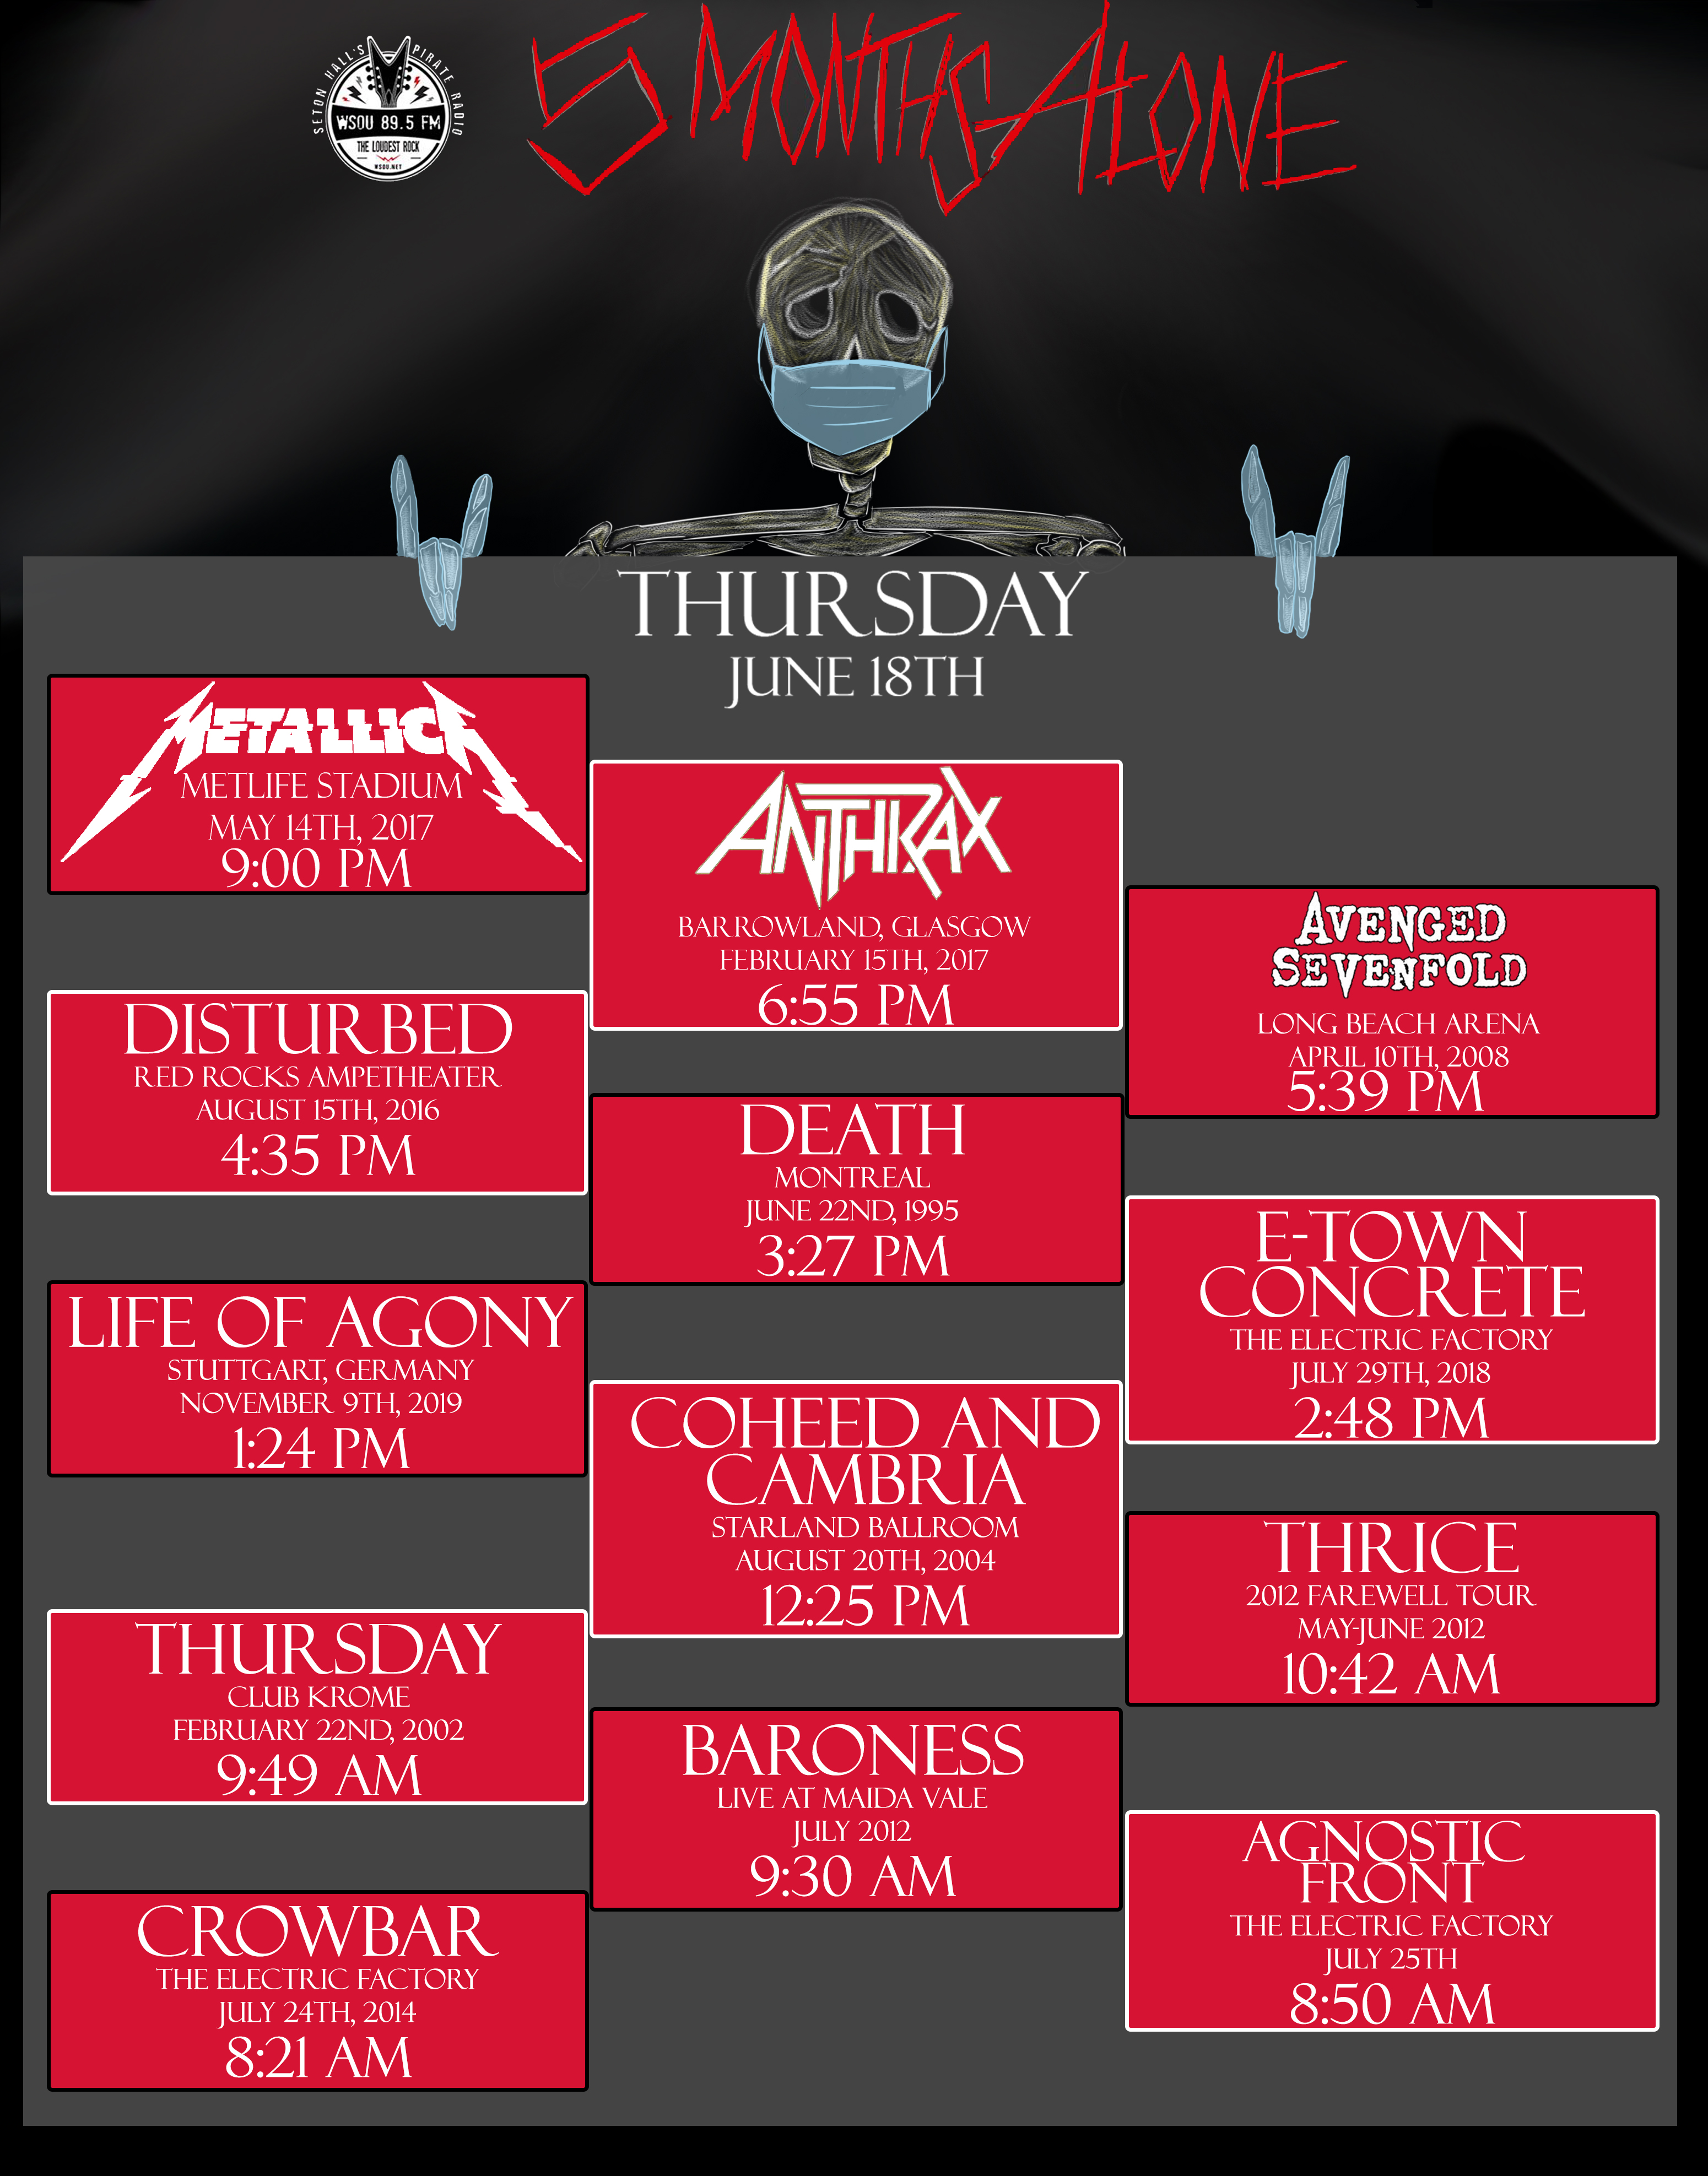 THURSDAY JUNE 18TH METALLICA 9:00 PM ANTHRAX 6:55 PM AVENGED SEVENFOLD 5:39 PM DISTURBED 4:35 PM DEATH 3:27 PM E-TOWN CONCRETE 2:48 PM LIFE OF AGONY 1:24 PM COEED AND CAMBRIA 12:25 PM THRICE 10:42 AM AND MORE!